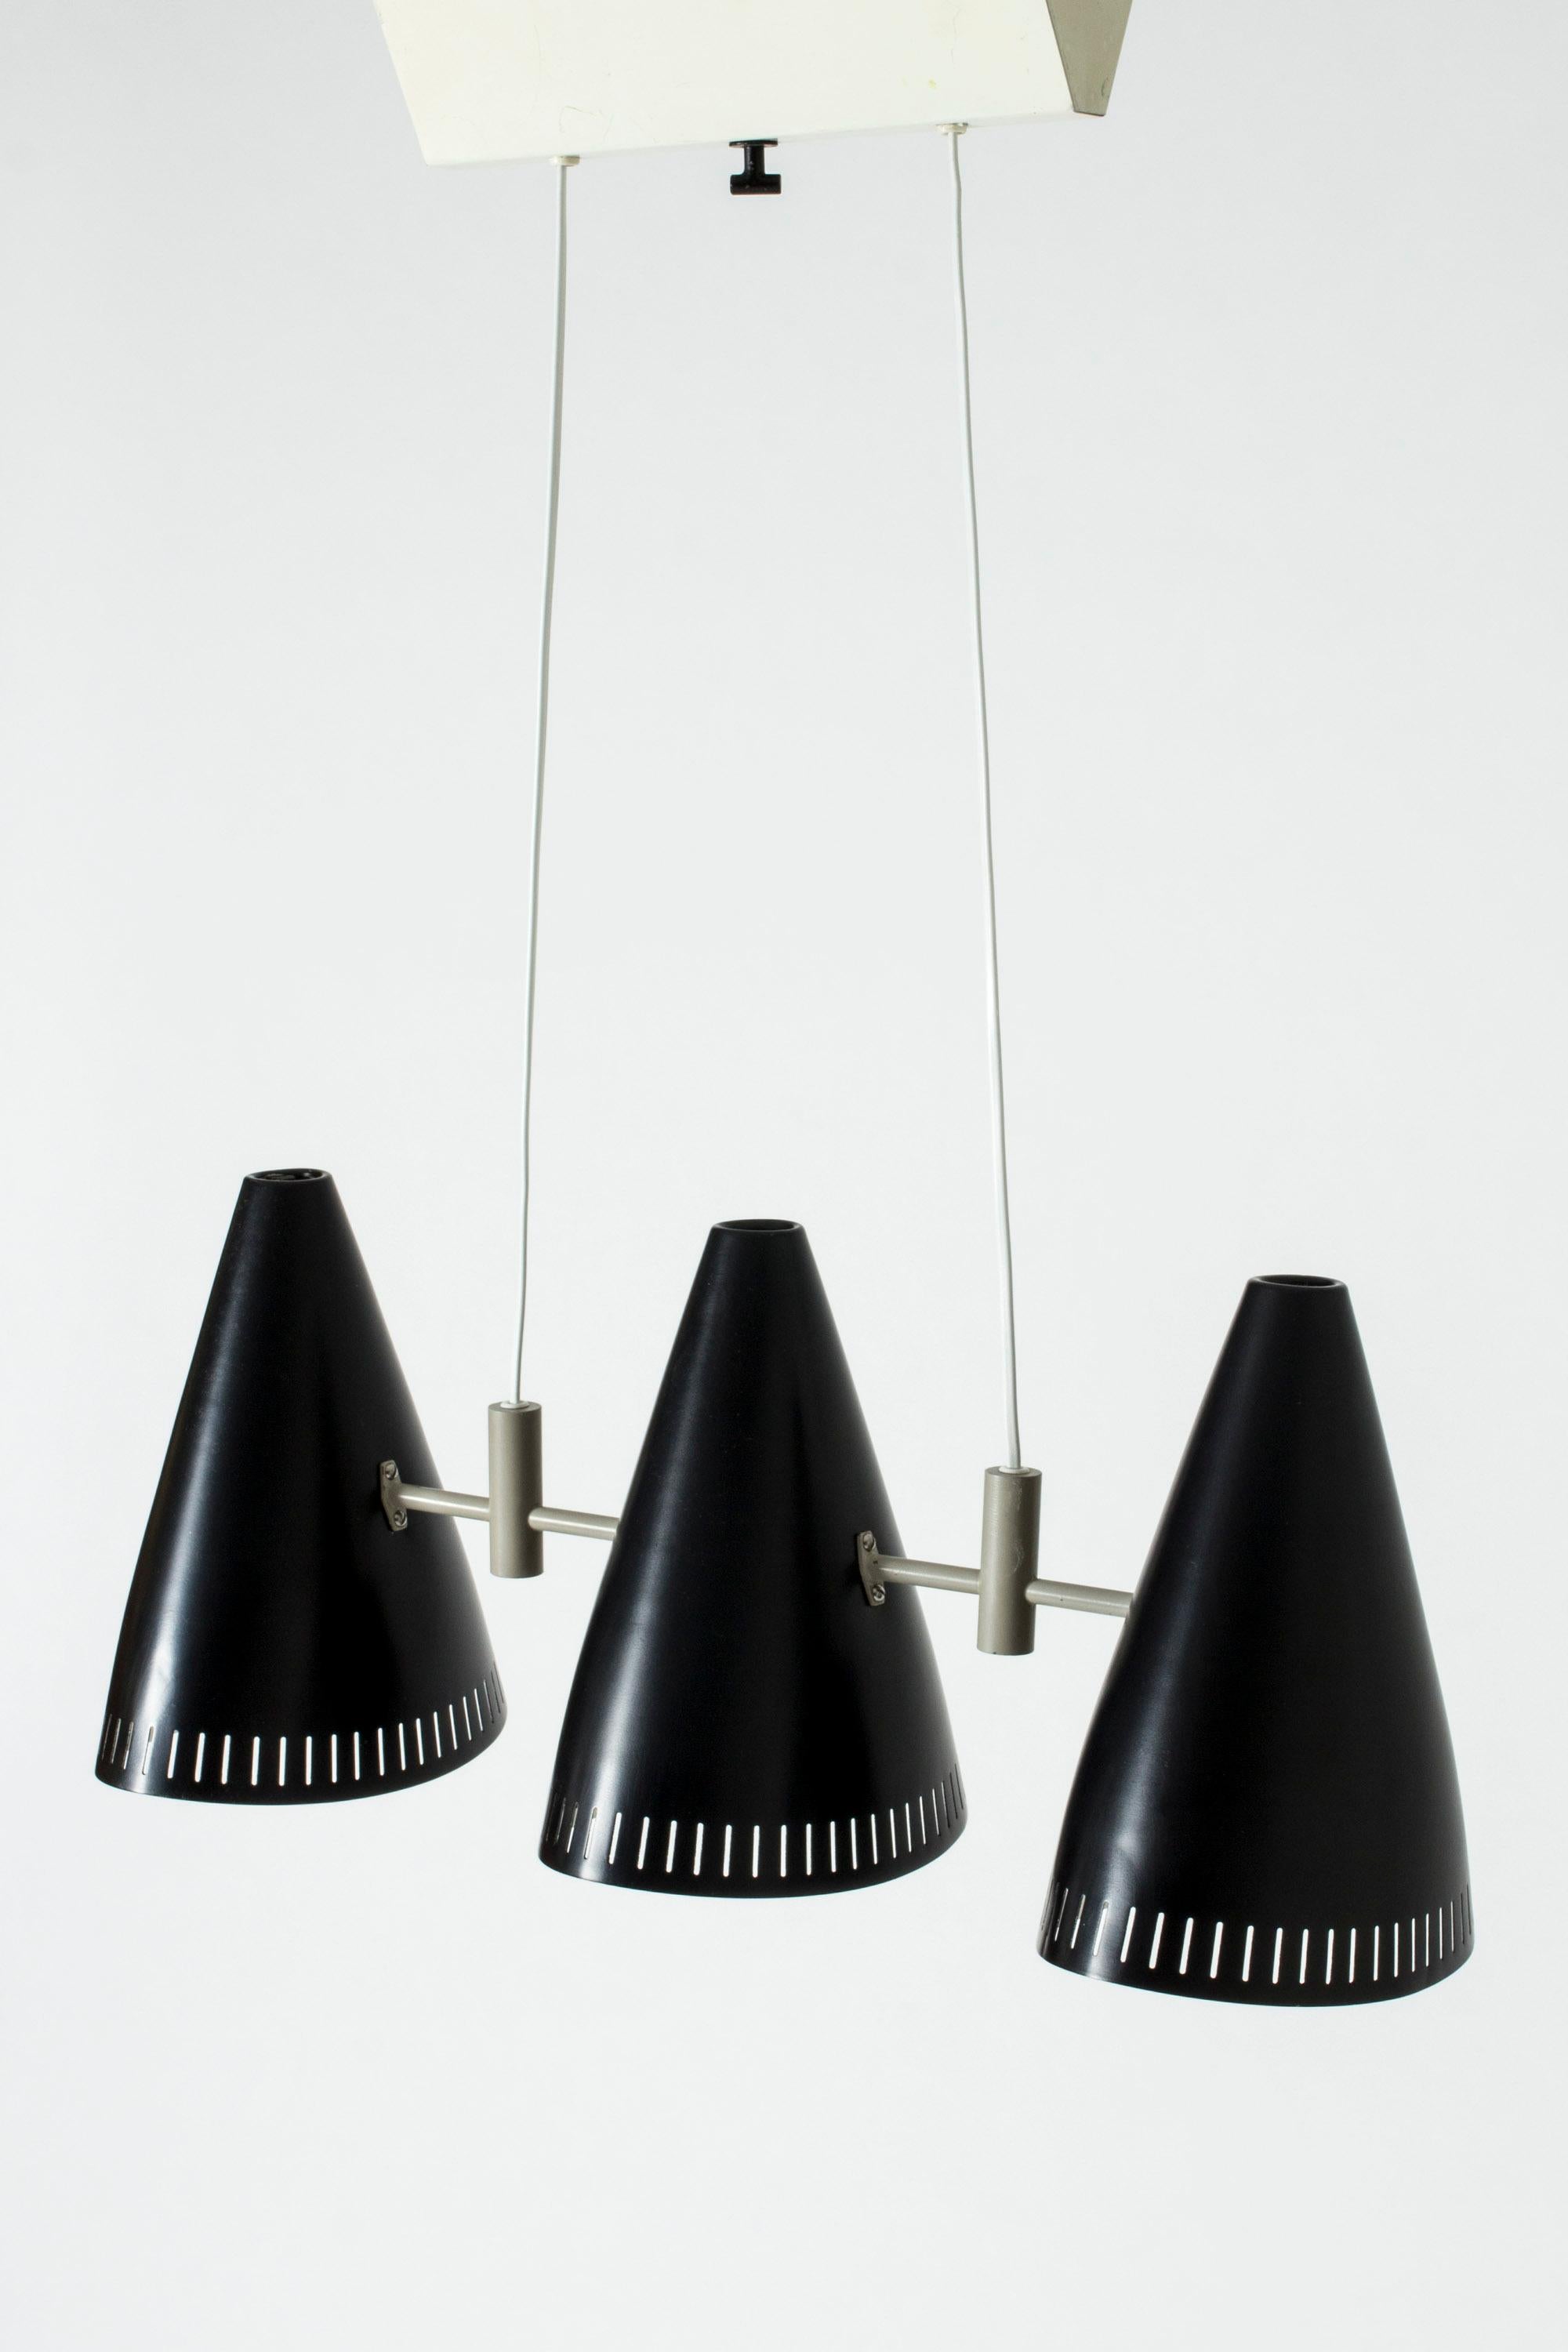 Very cool ceiling lamp by Eje Ahlgren, with three black lacquered shades. Sleek graphic look with light grey lacquered details and a long, boxy ceiling cup.